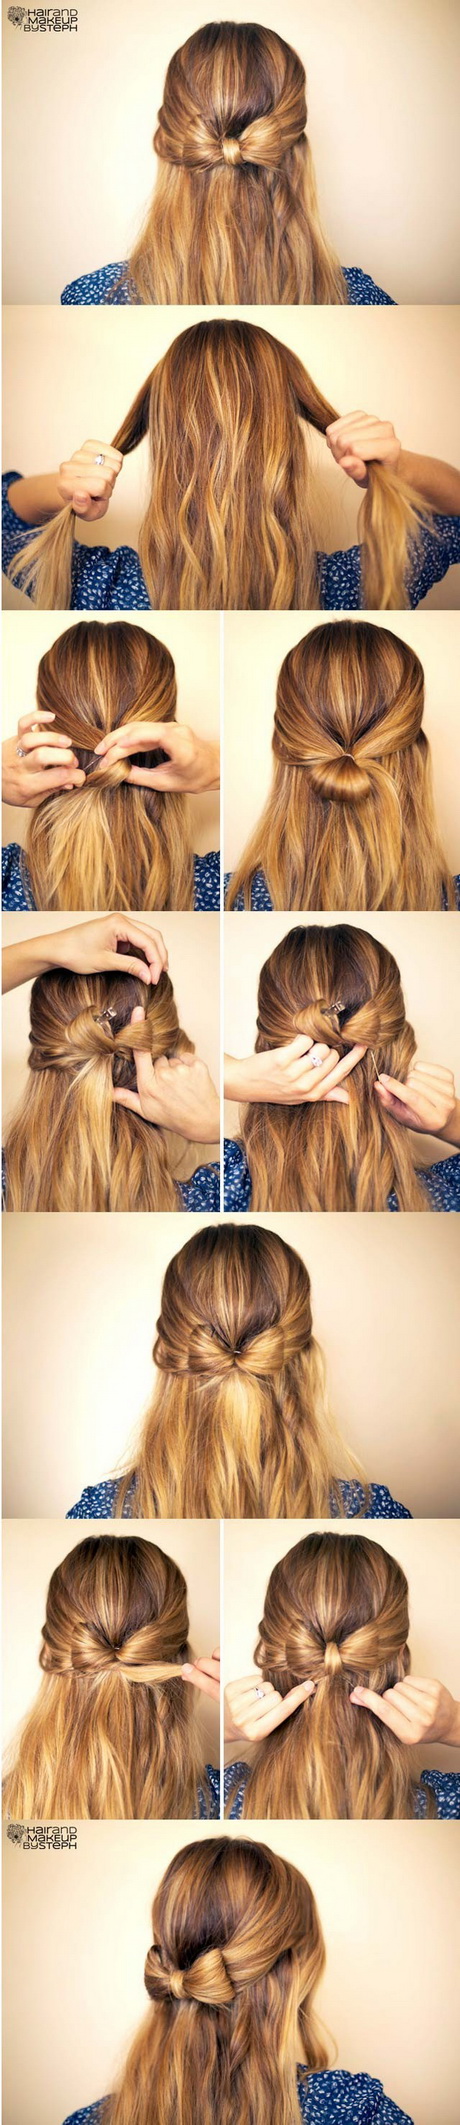 Easy hairstyles for long hair step by step easy-hairstyles-for-long-hair-step-by-step-49-15